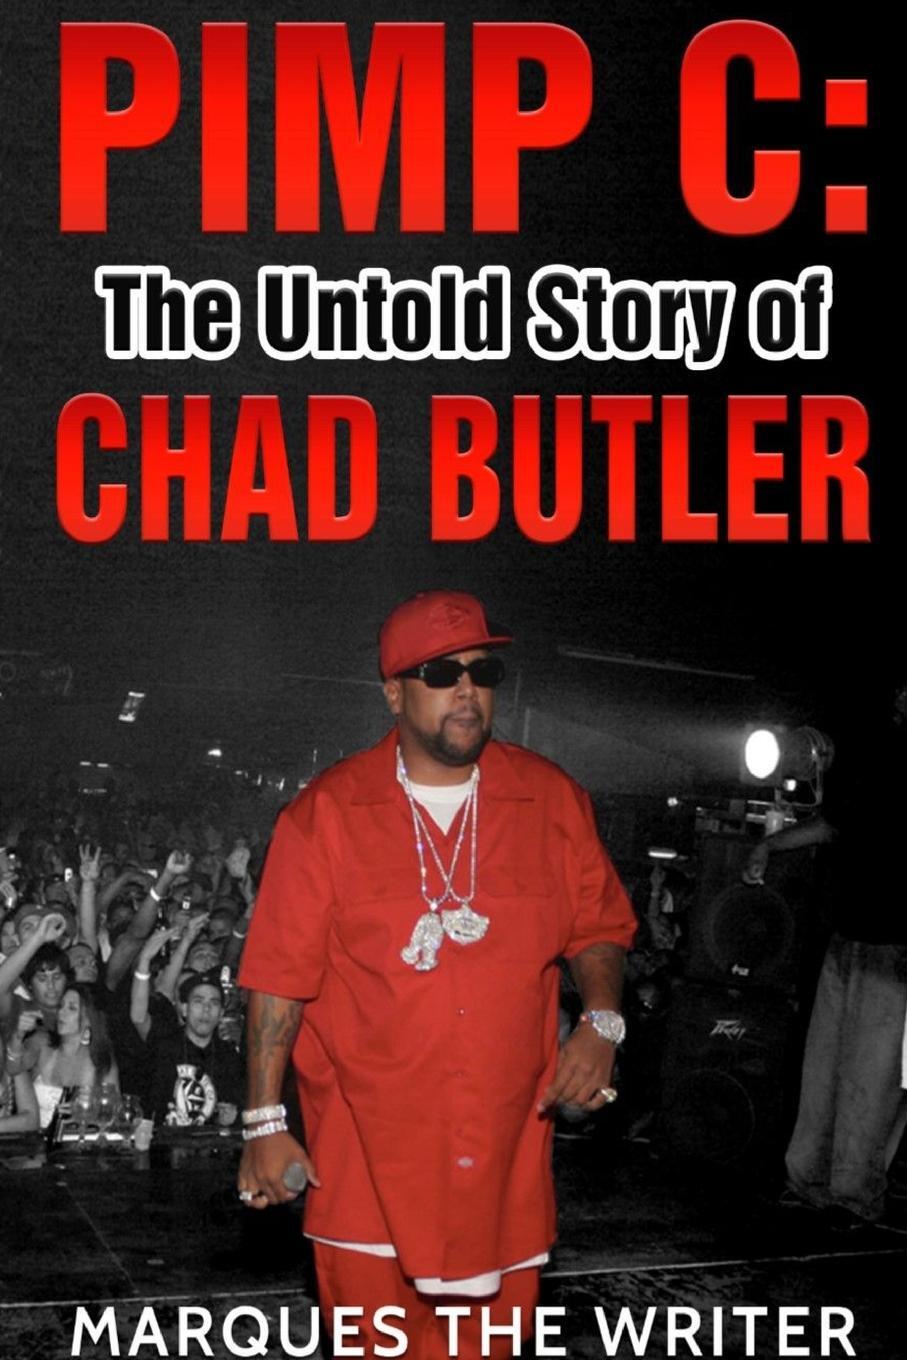 фото Pimp C. The Untold Story of Chad Butler